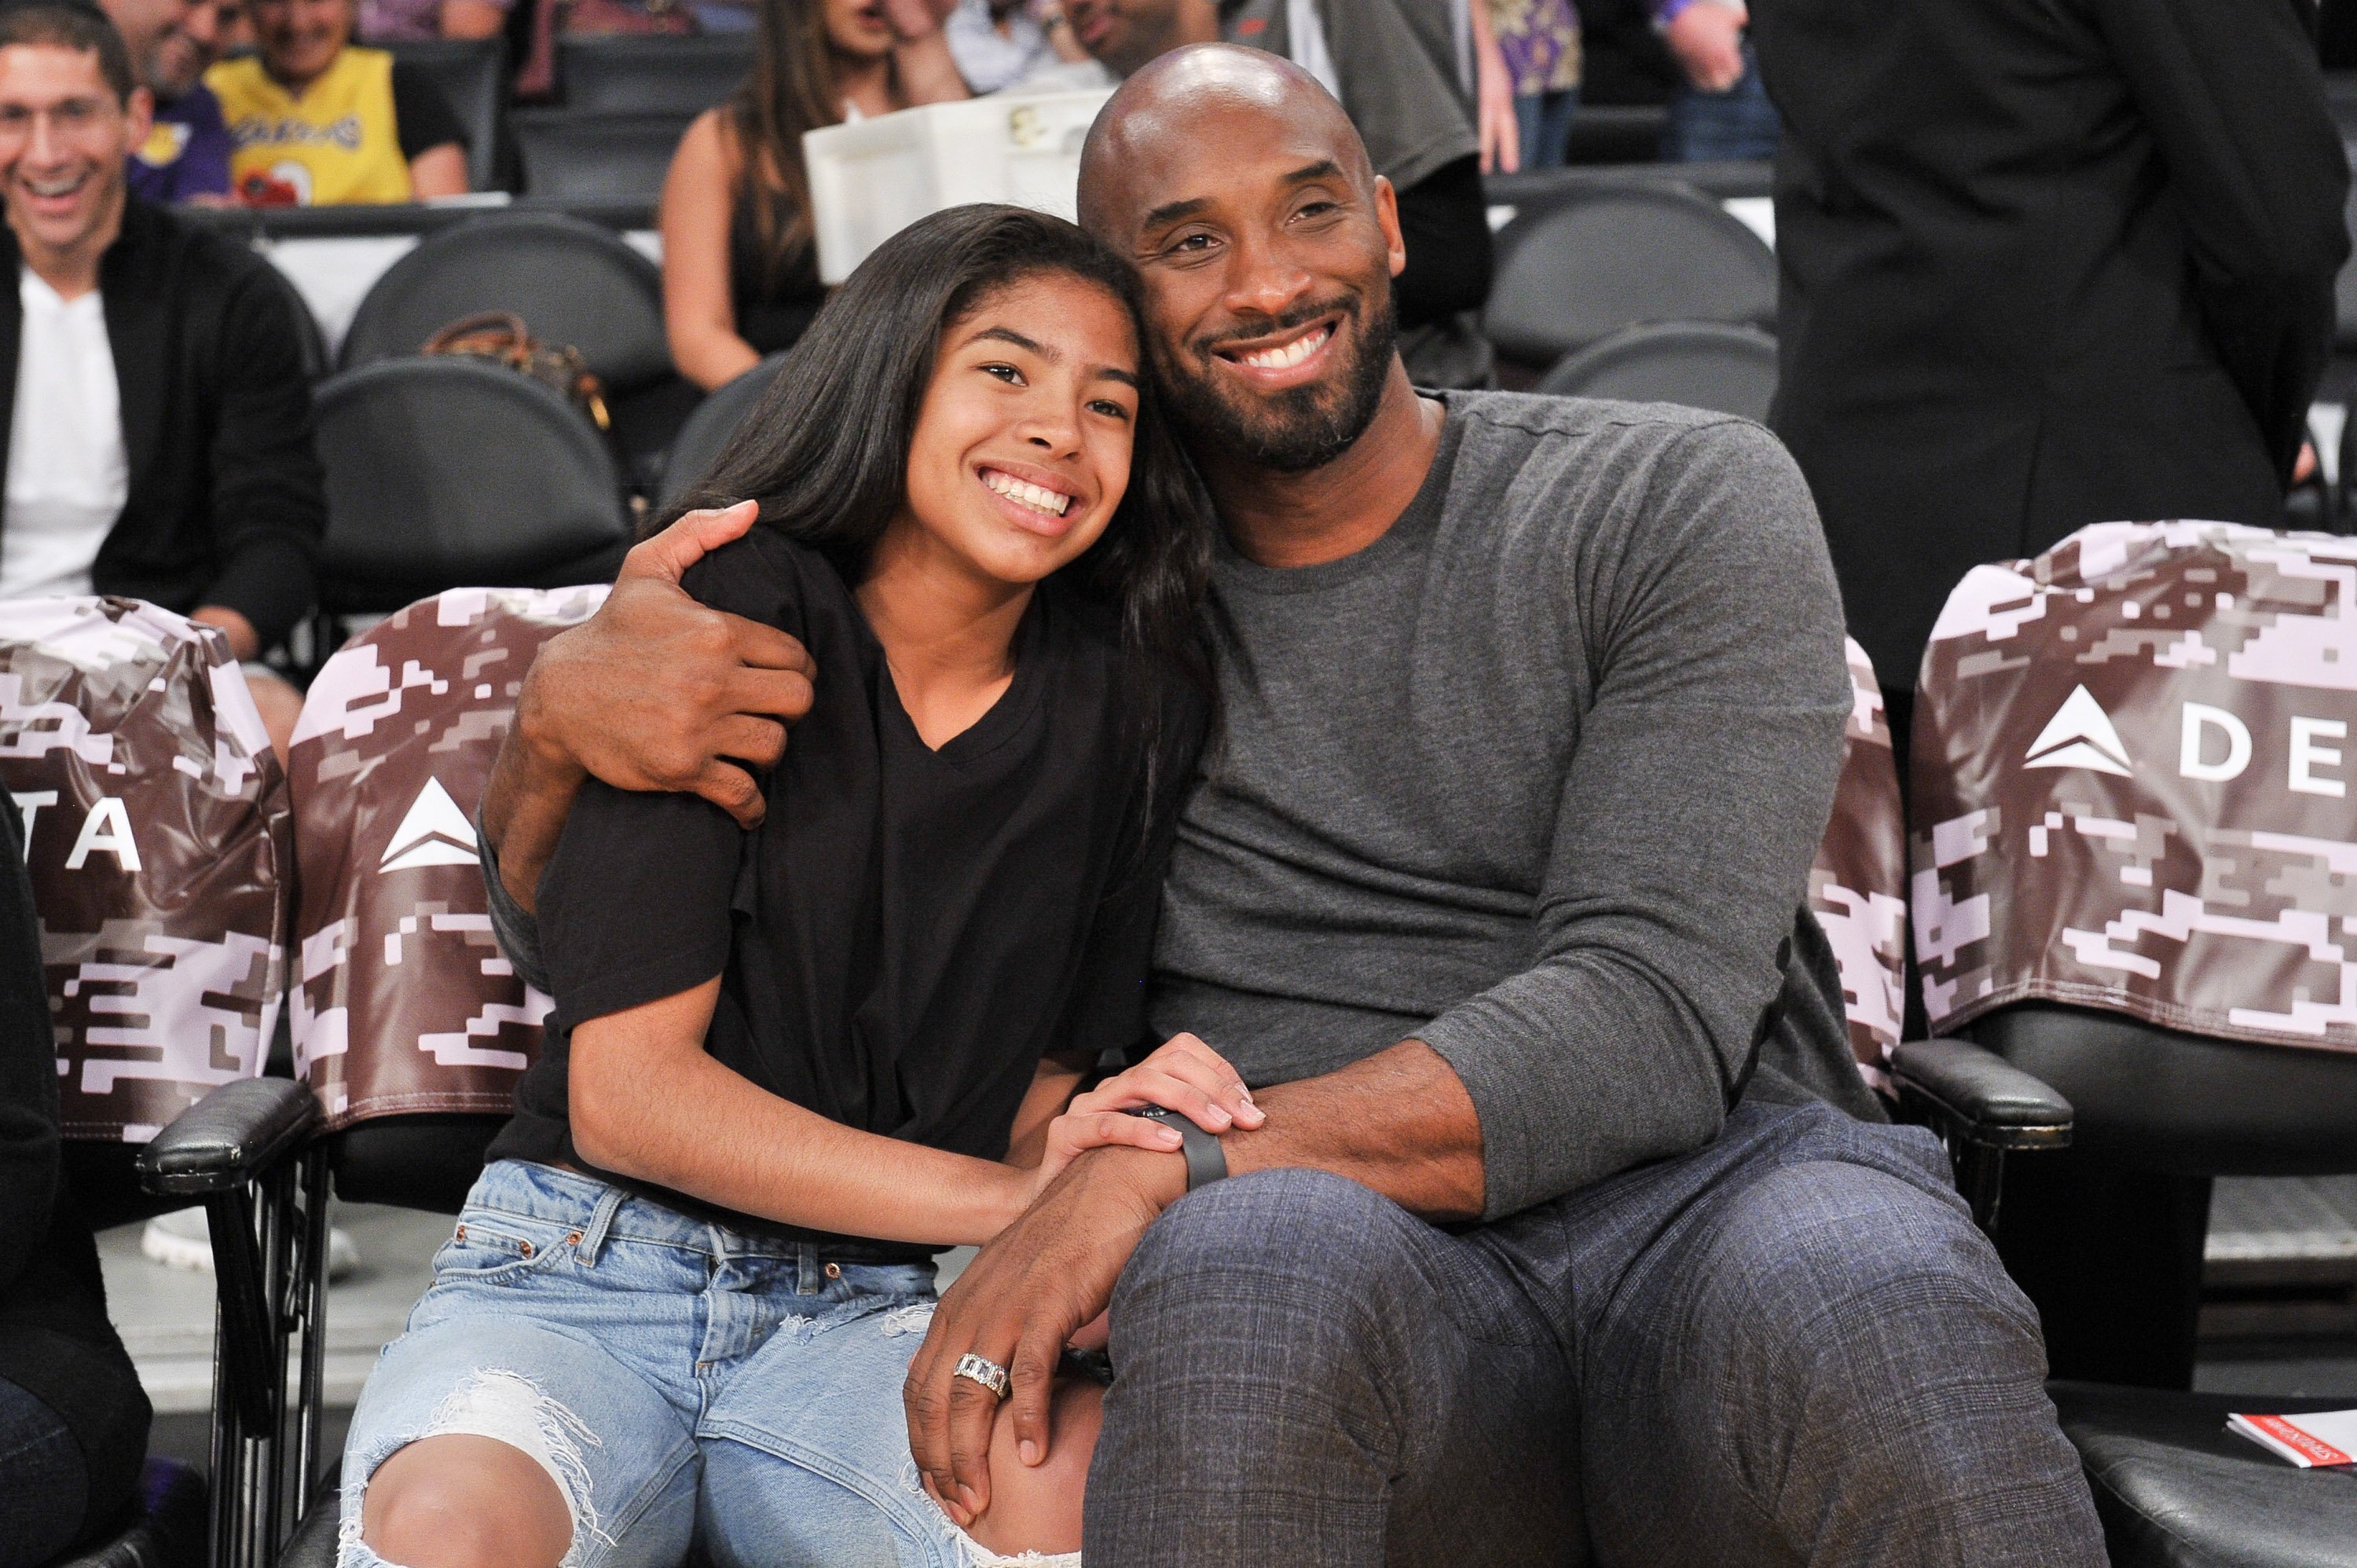 Kobe Bryant and Gianna Bryant at a basketball game between the Los Angeles Lakers and the Atlanta Hawks at Staples Center in Los Angeles, California | Photo: Allen Berezovsky/Getty Images